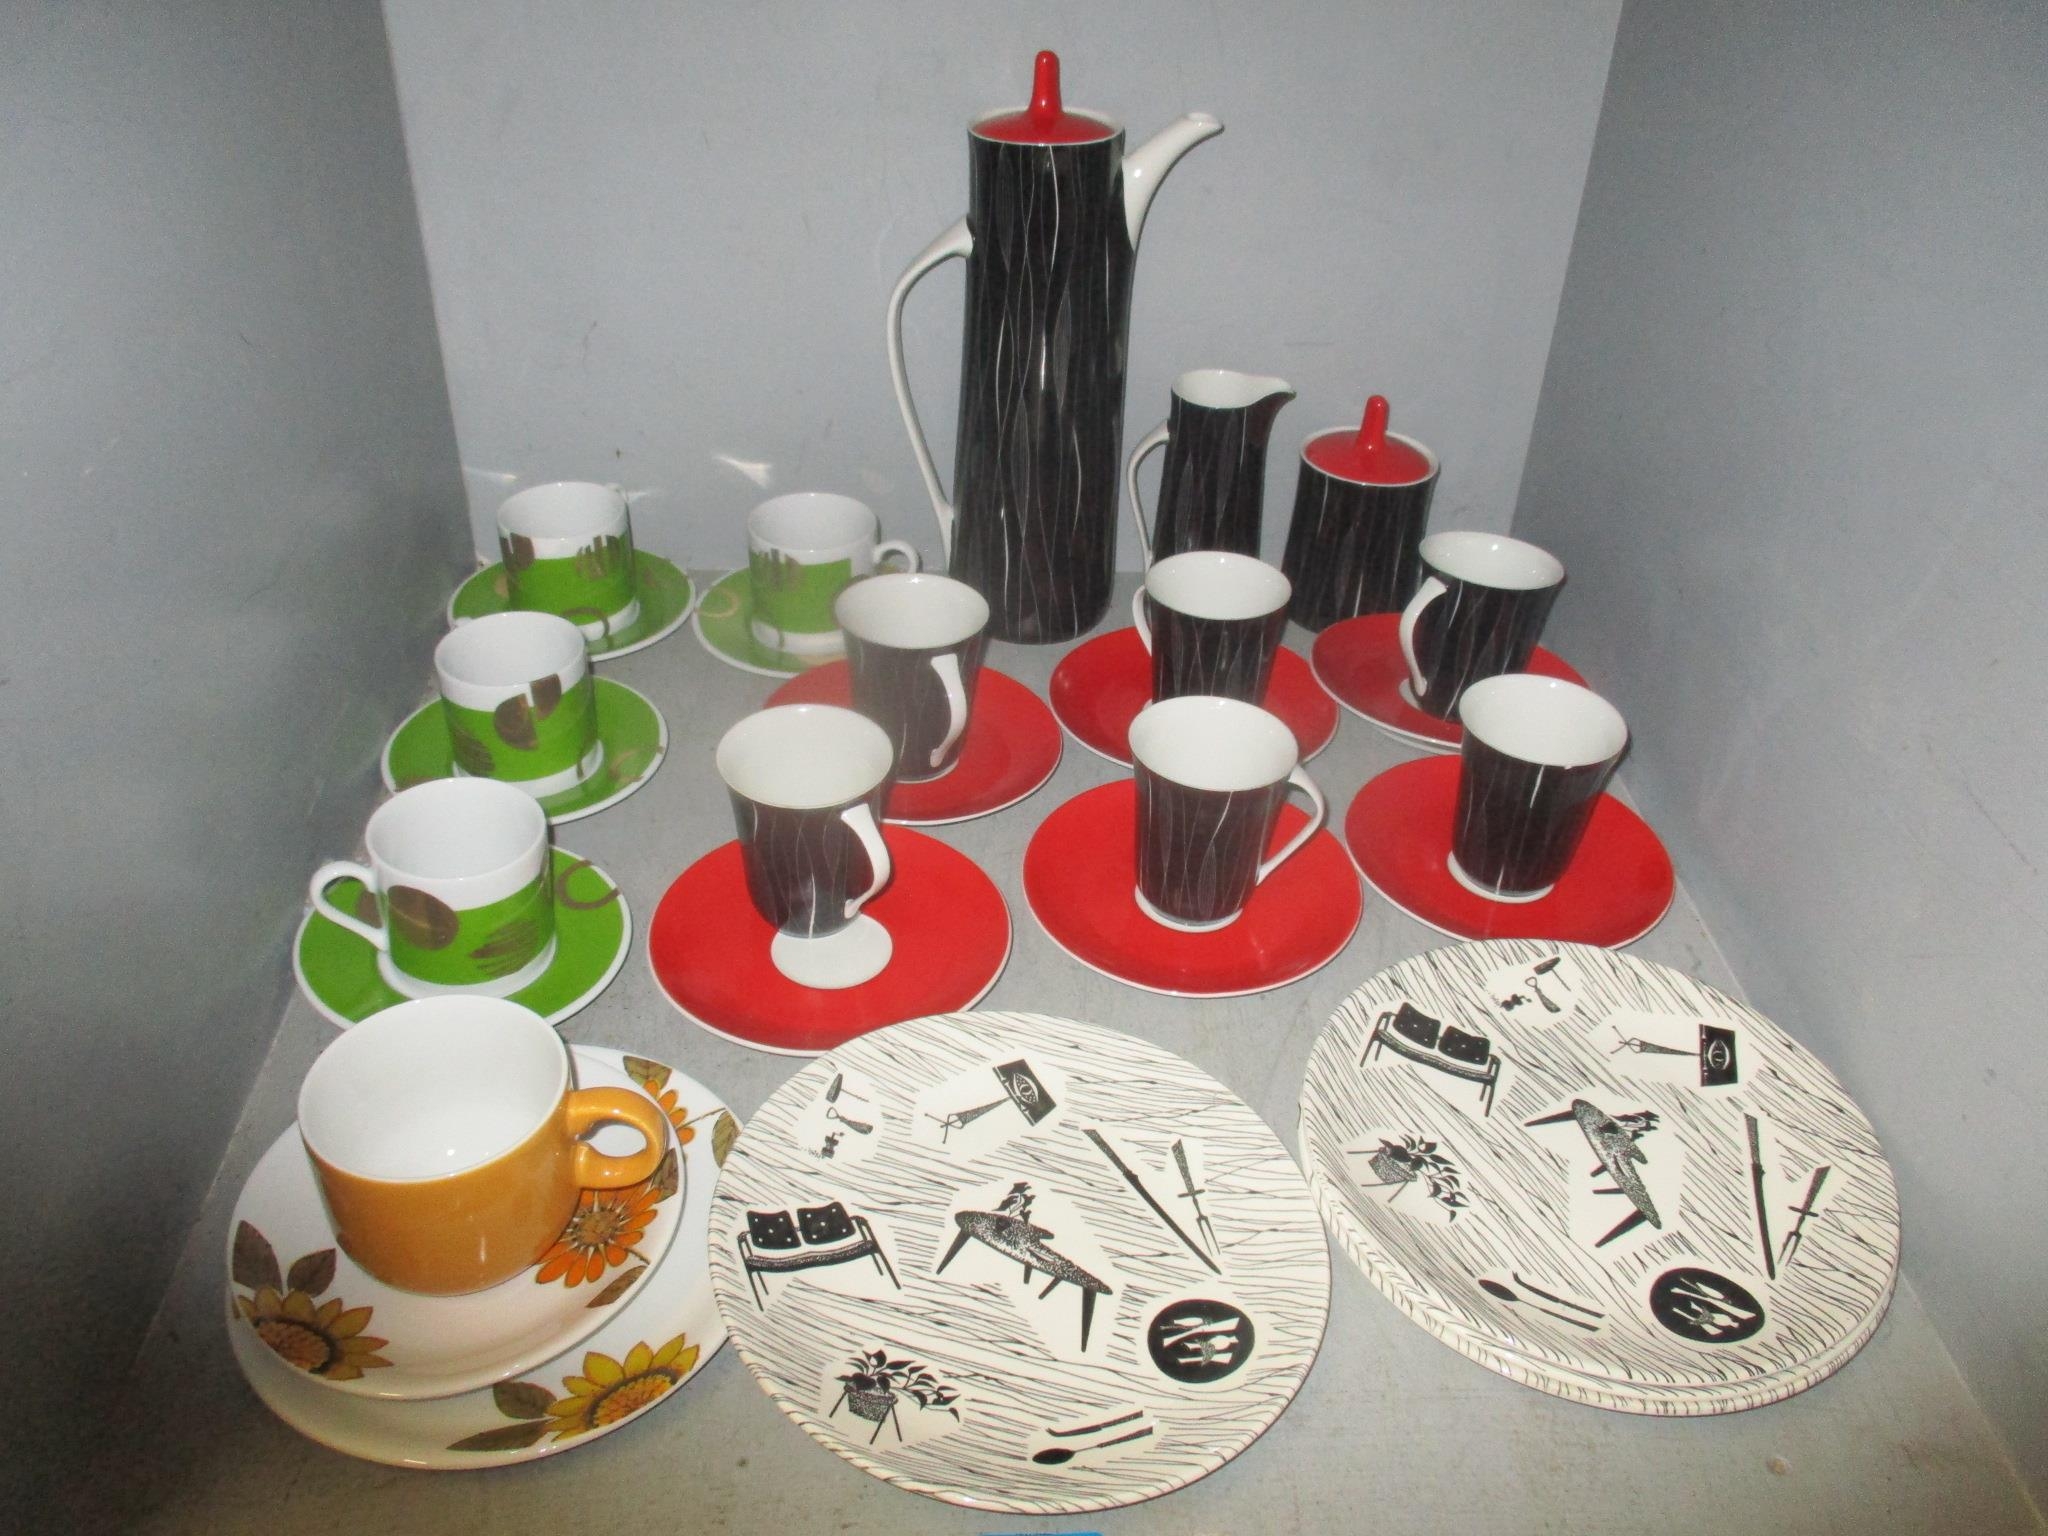 Mid 20th century ceramics to include four Home Maker plates, an Alfred Meaking trio and a set of